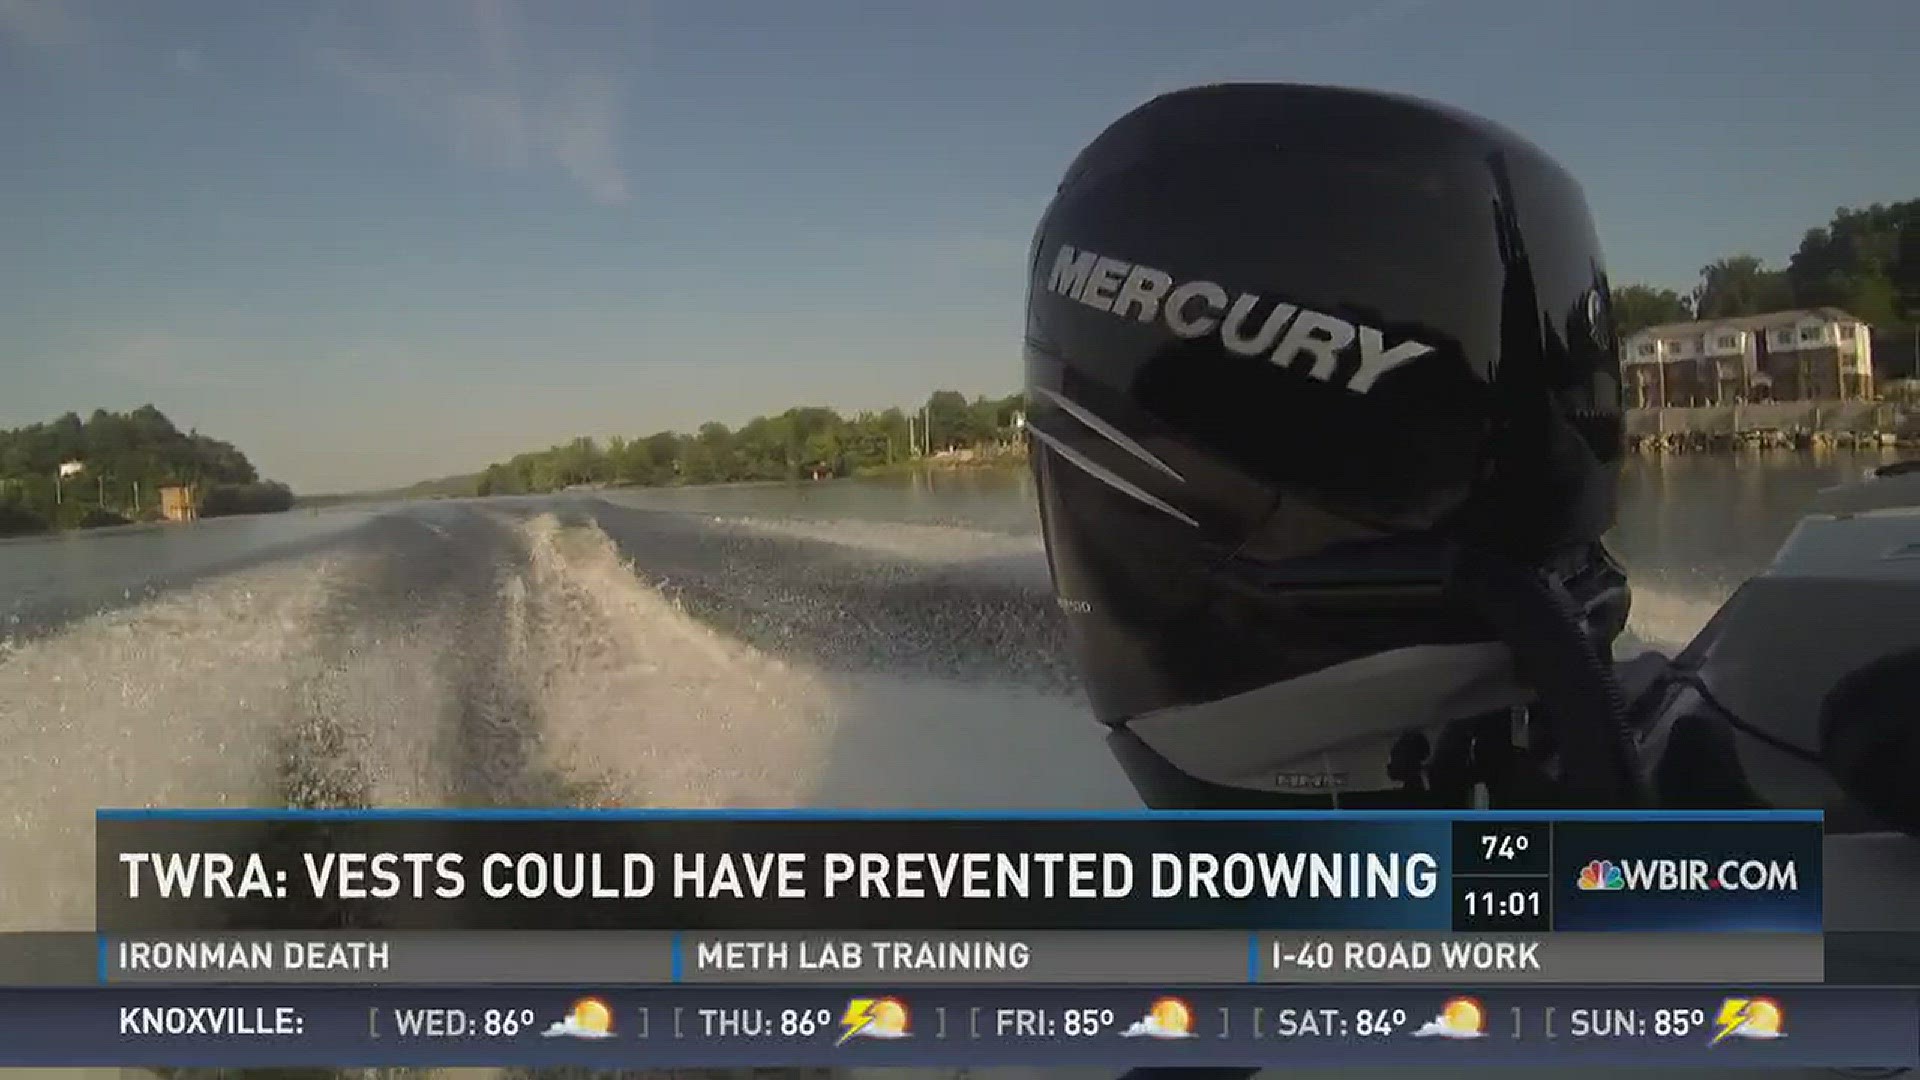 10News reporter Leslie Ackerson has more on how life vests can save lives in boating accidents. (5/24/16)